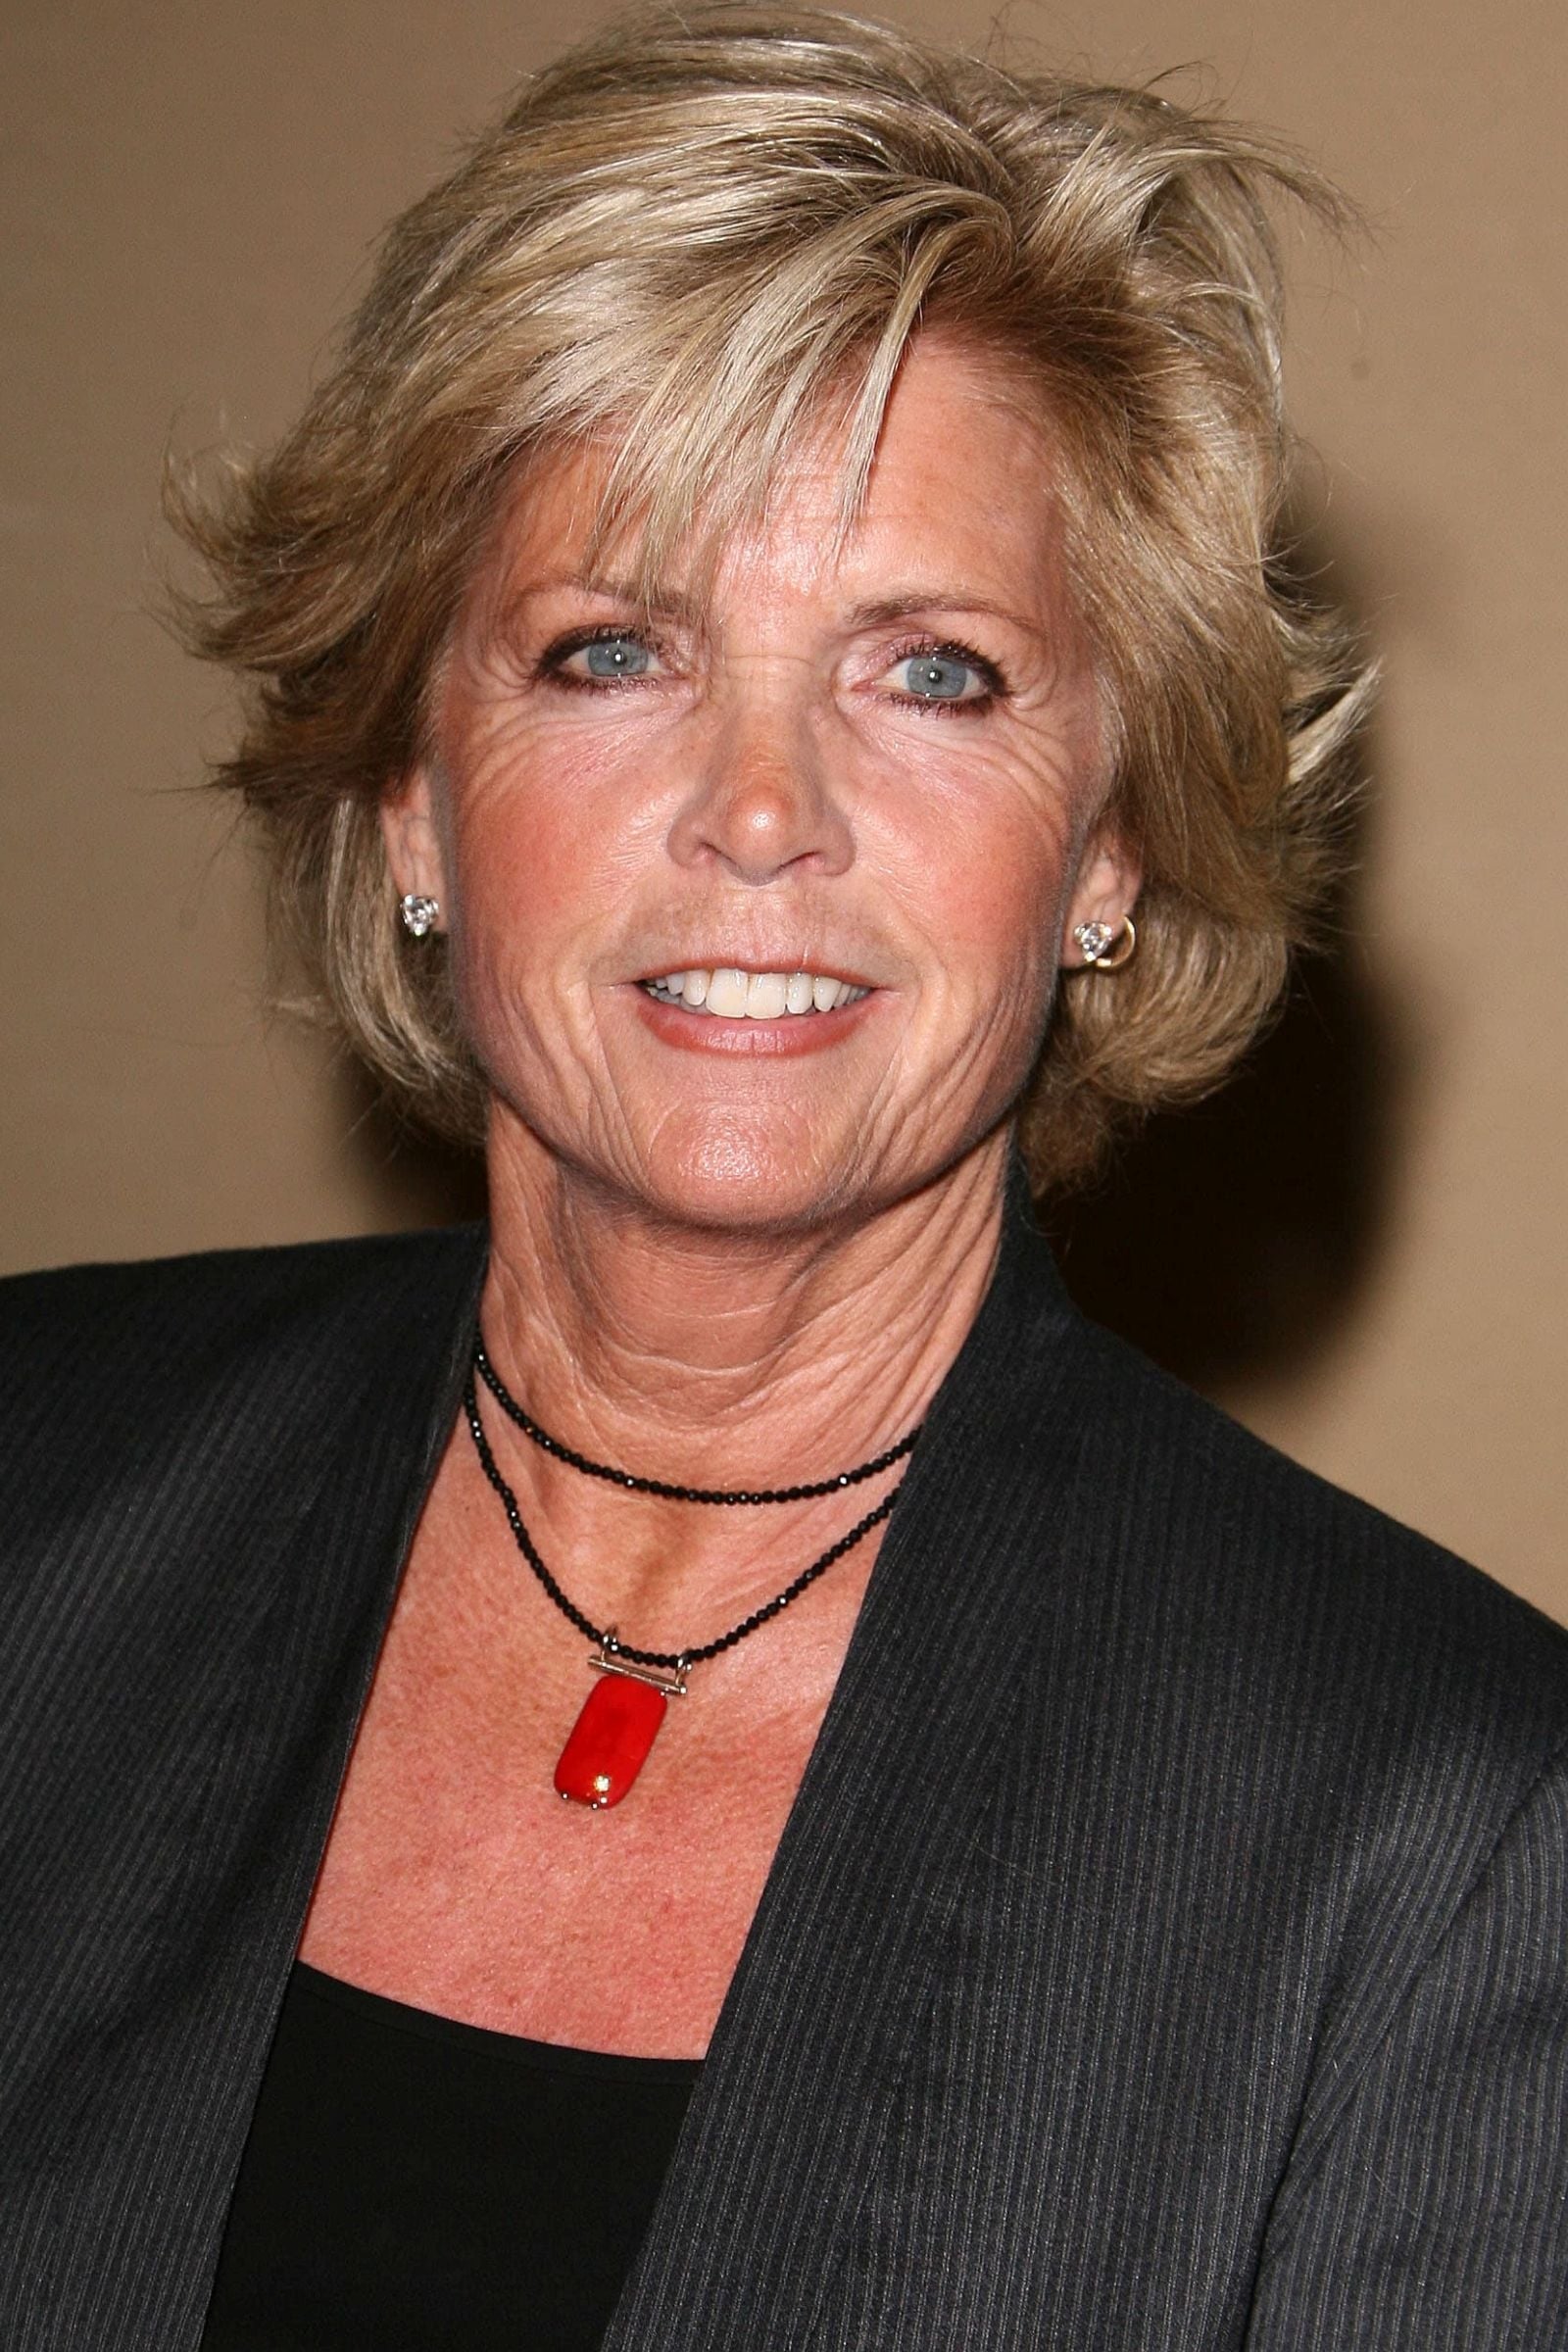 Images of Meredith Baxter.